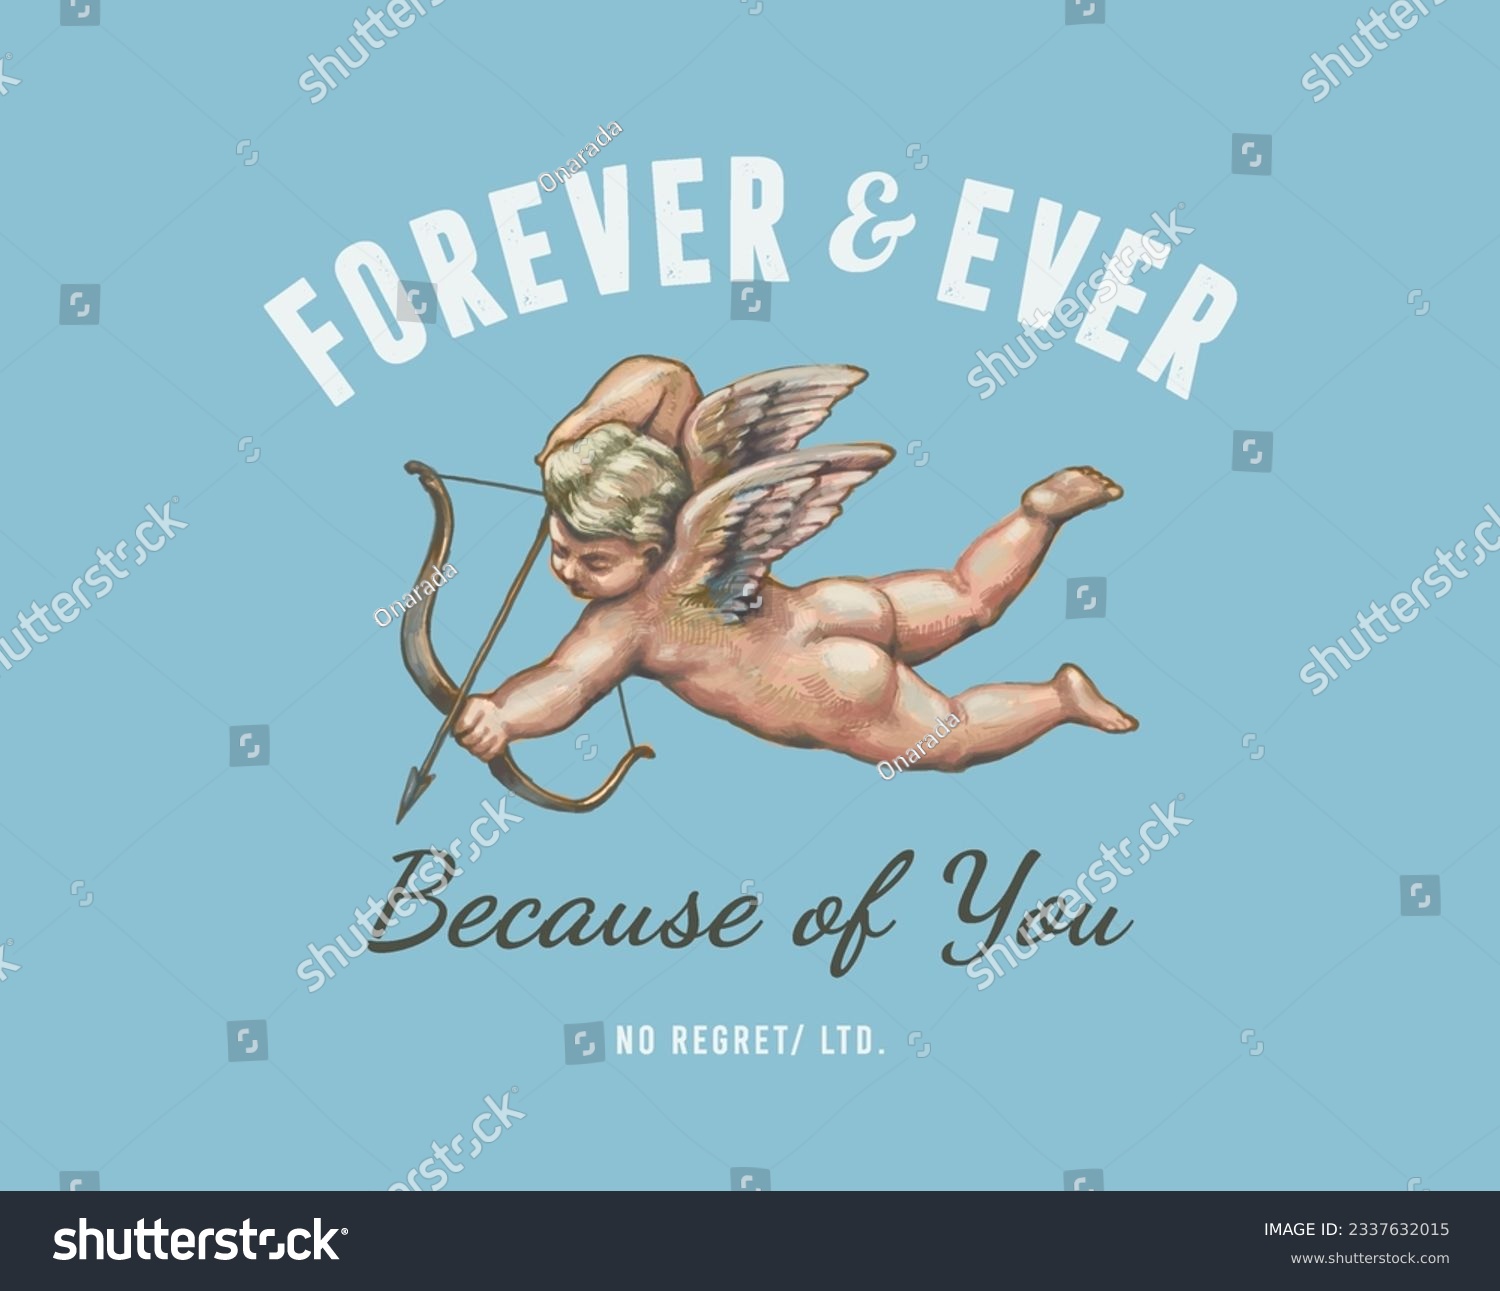 SVG of forever and ever slogan with Flying Cupid holding bow and aiming or shooting arrow ,vector illustration for t-shirt. svg